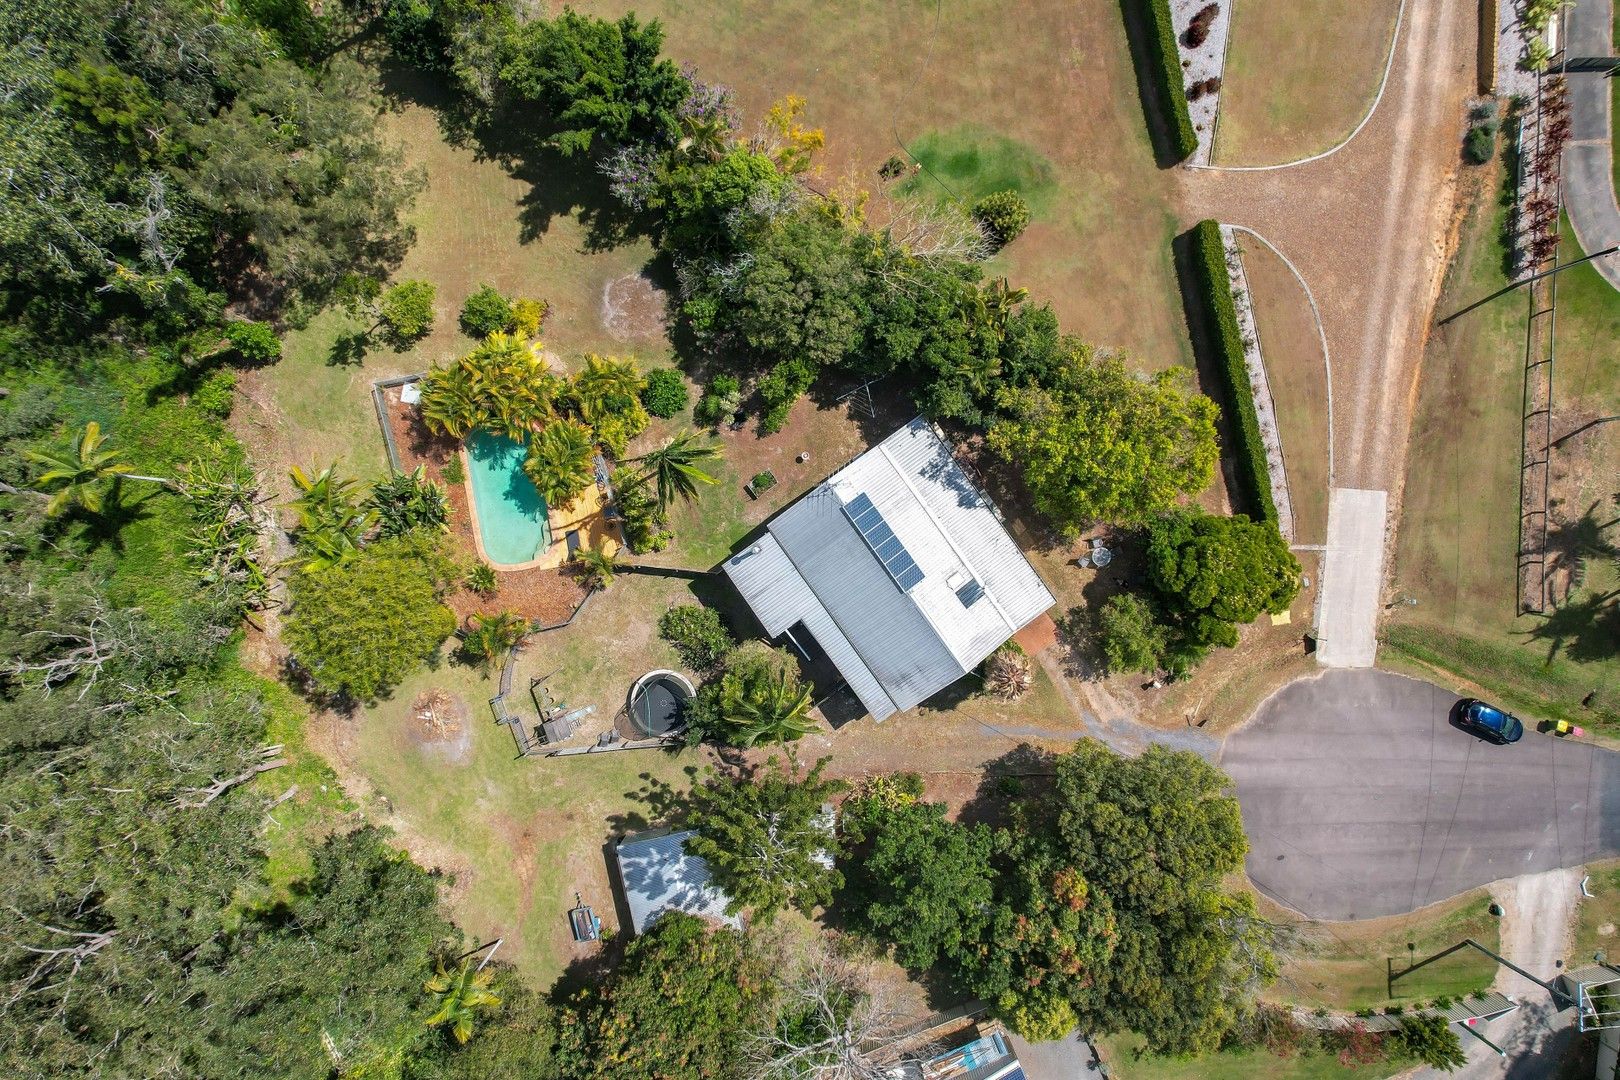 5 bedrooms Acreage / Semi-Rural in 34 Phyllis Court GLASS HOUSE MOUNTAINS QLD, 4518